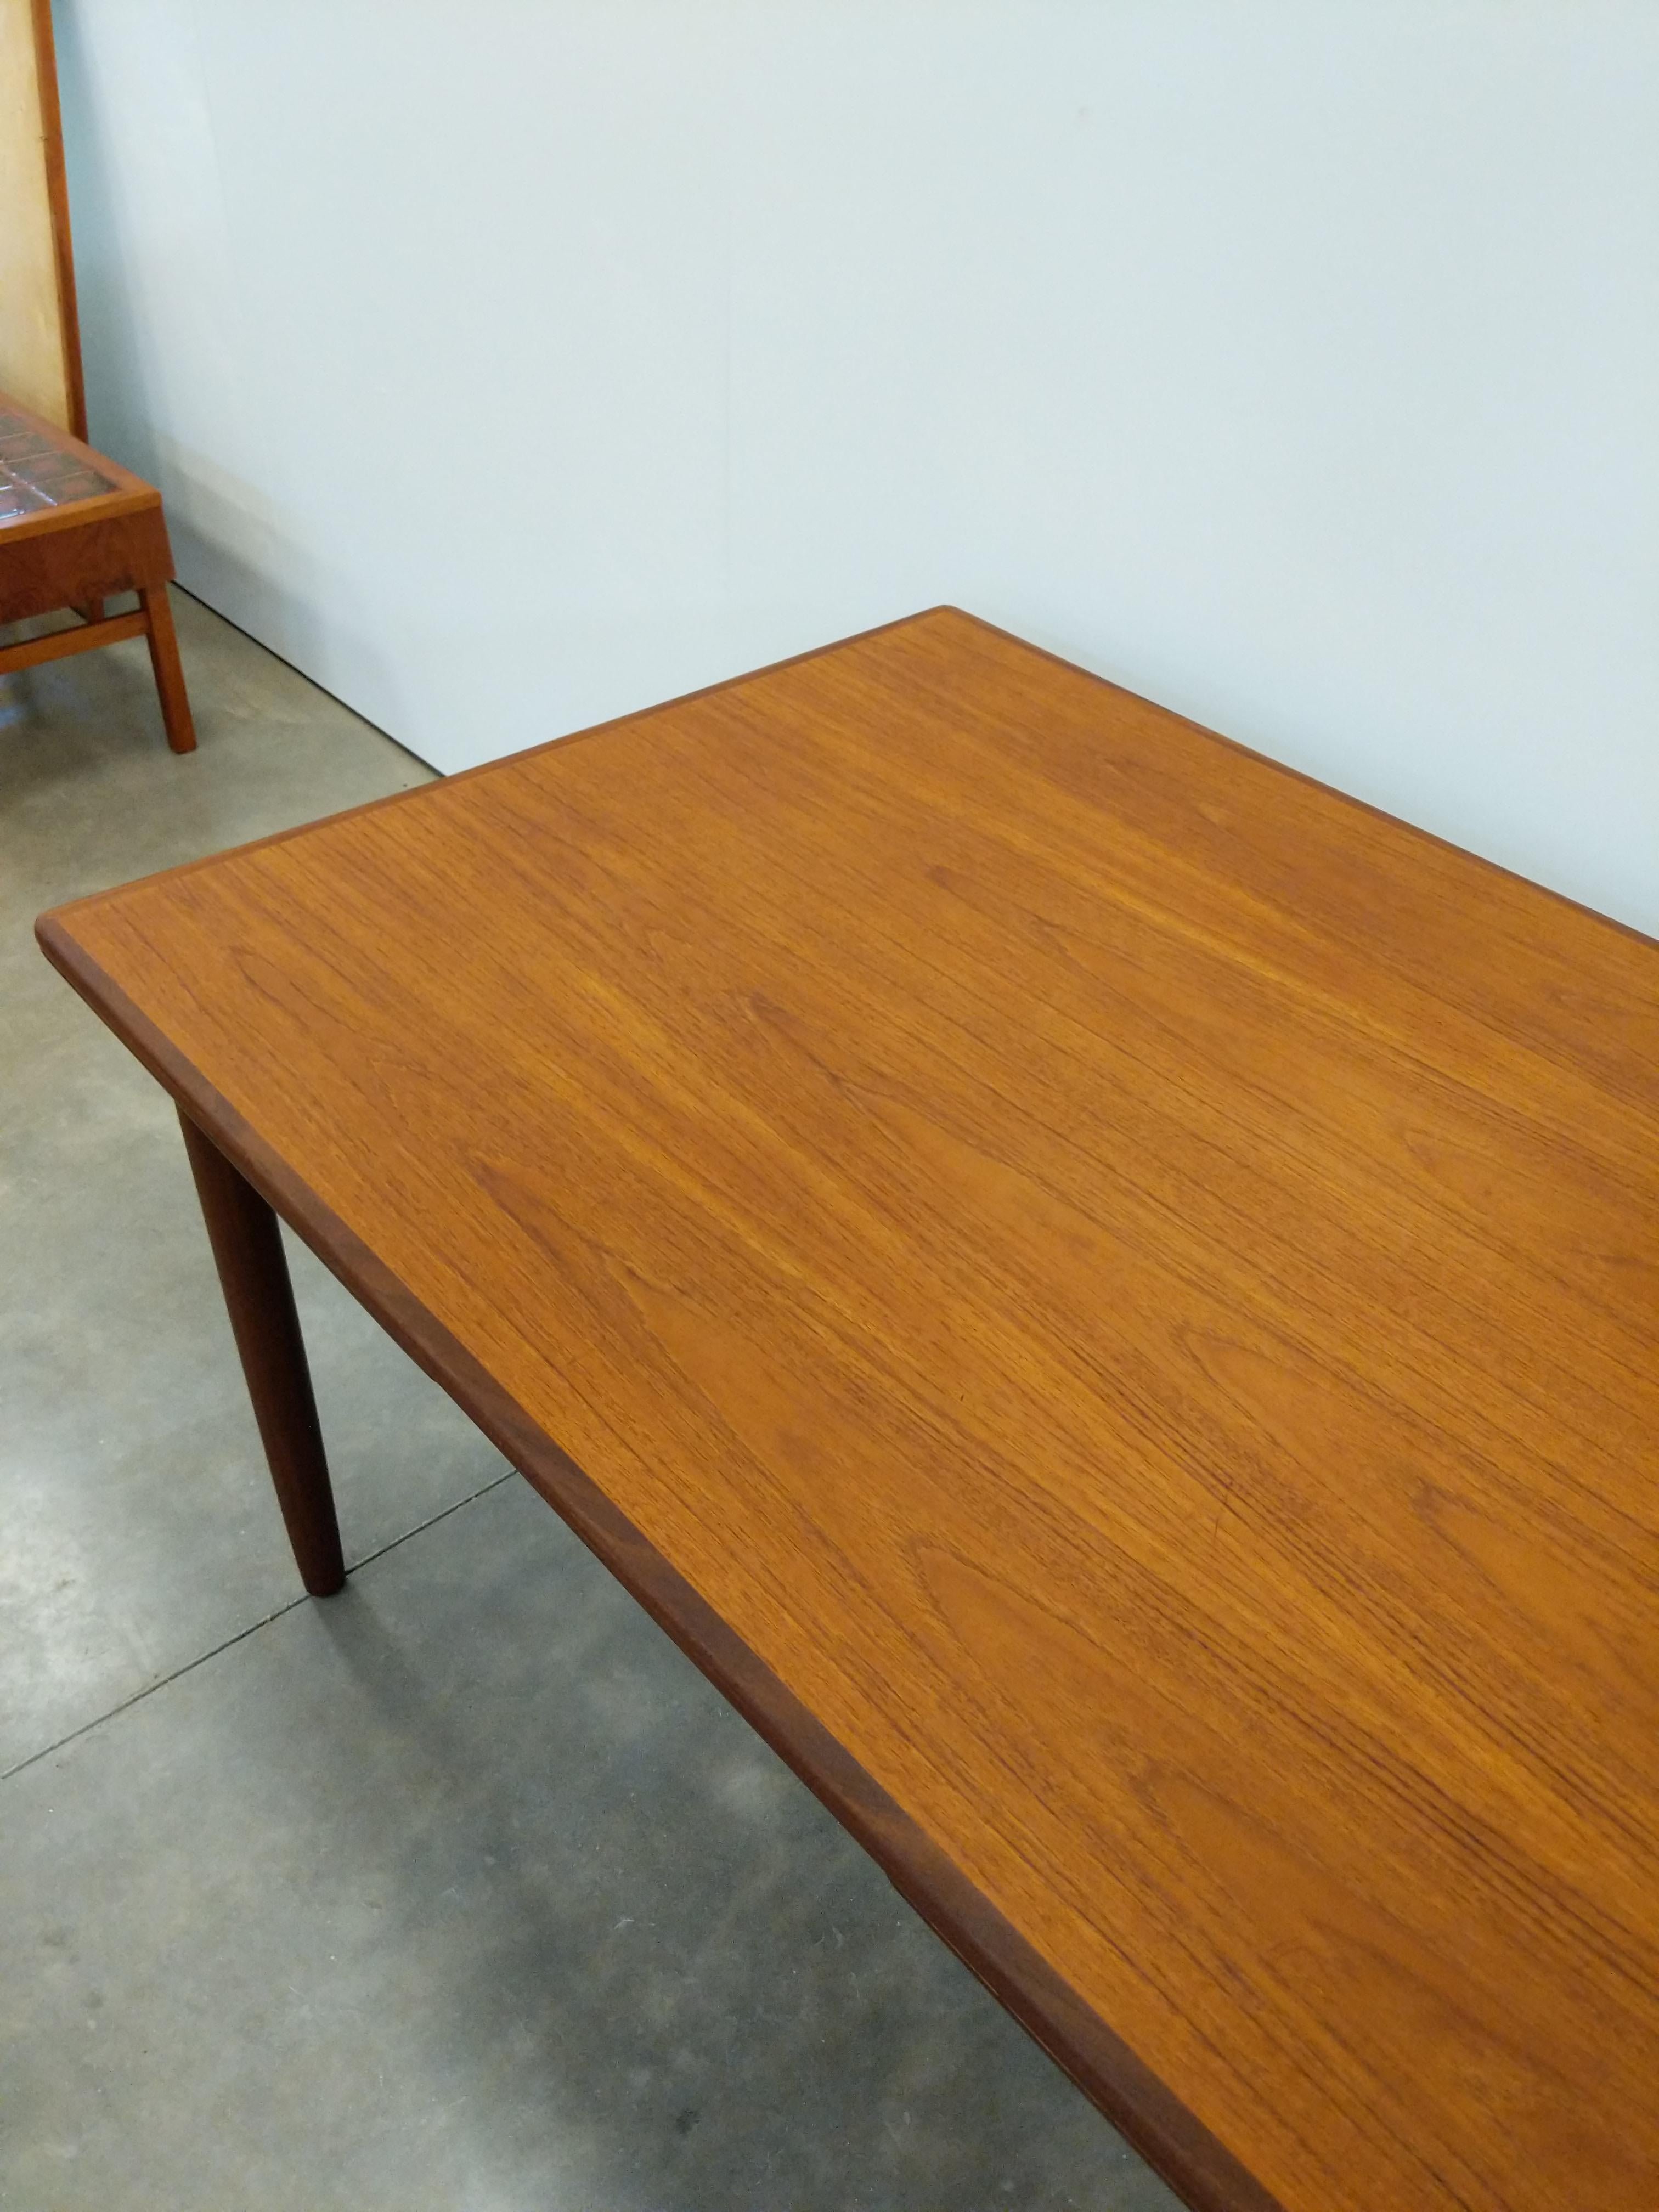 Vintage Danish Mid Century Modern Teak Extendable Dining Table In Good Condition For Sale In Gardiner, NY